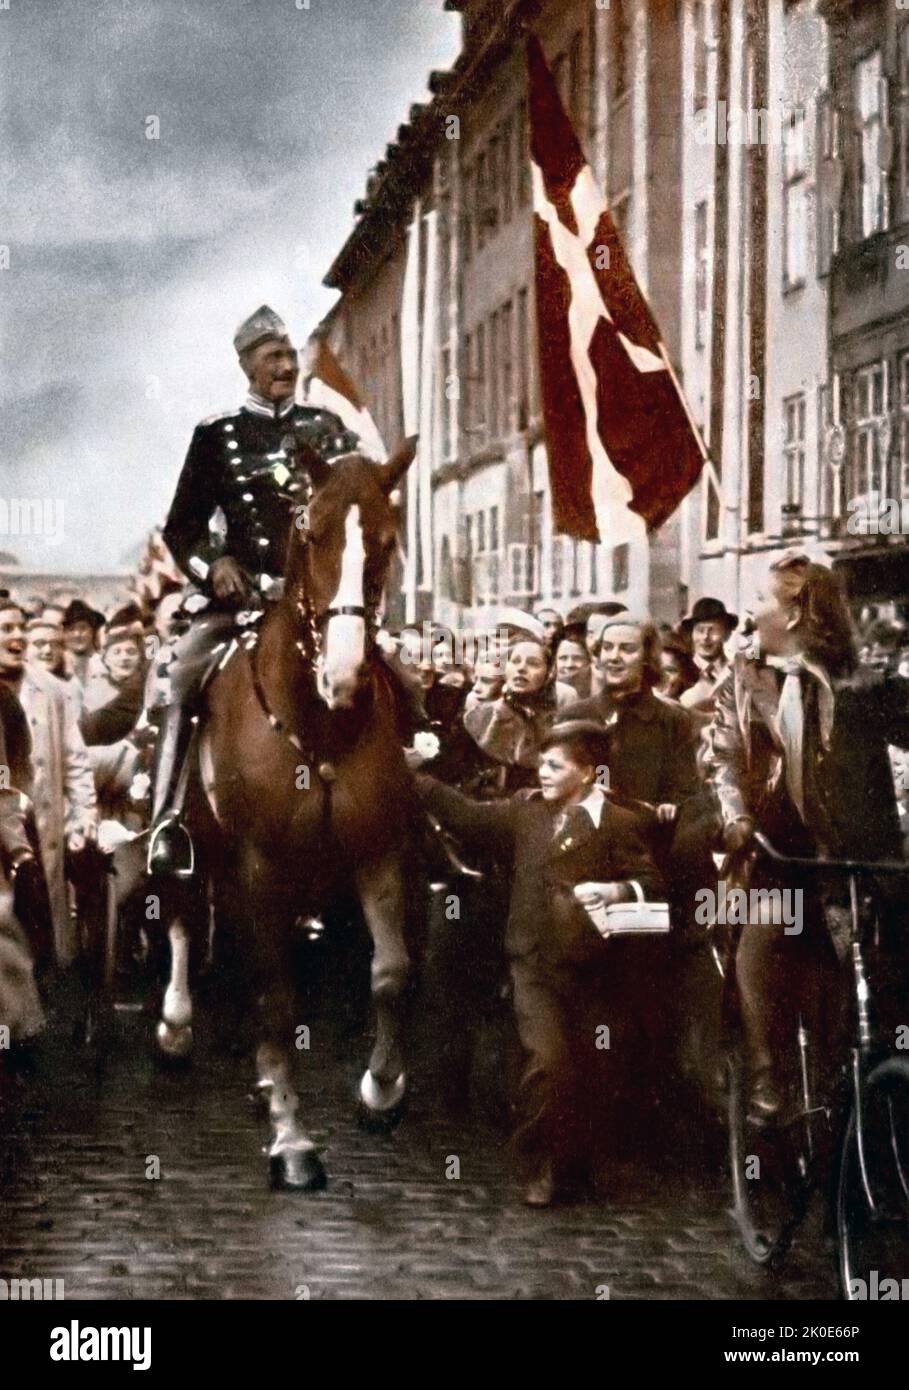 King Christian X of Denmark, riding through Copenhagen on his 70th birthday, 1940. The picture was taken during the German occupation of Denmark, in World War II. Stock Photo